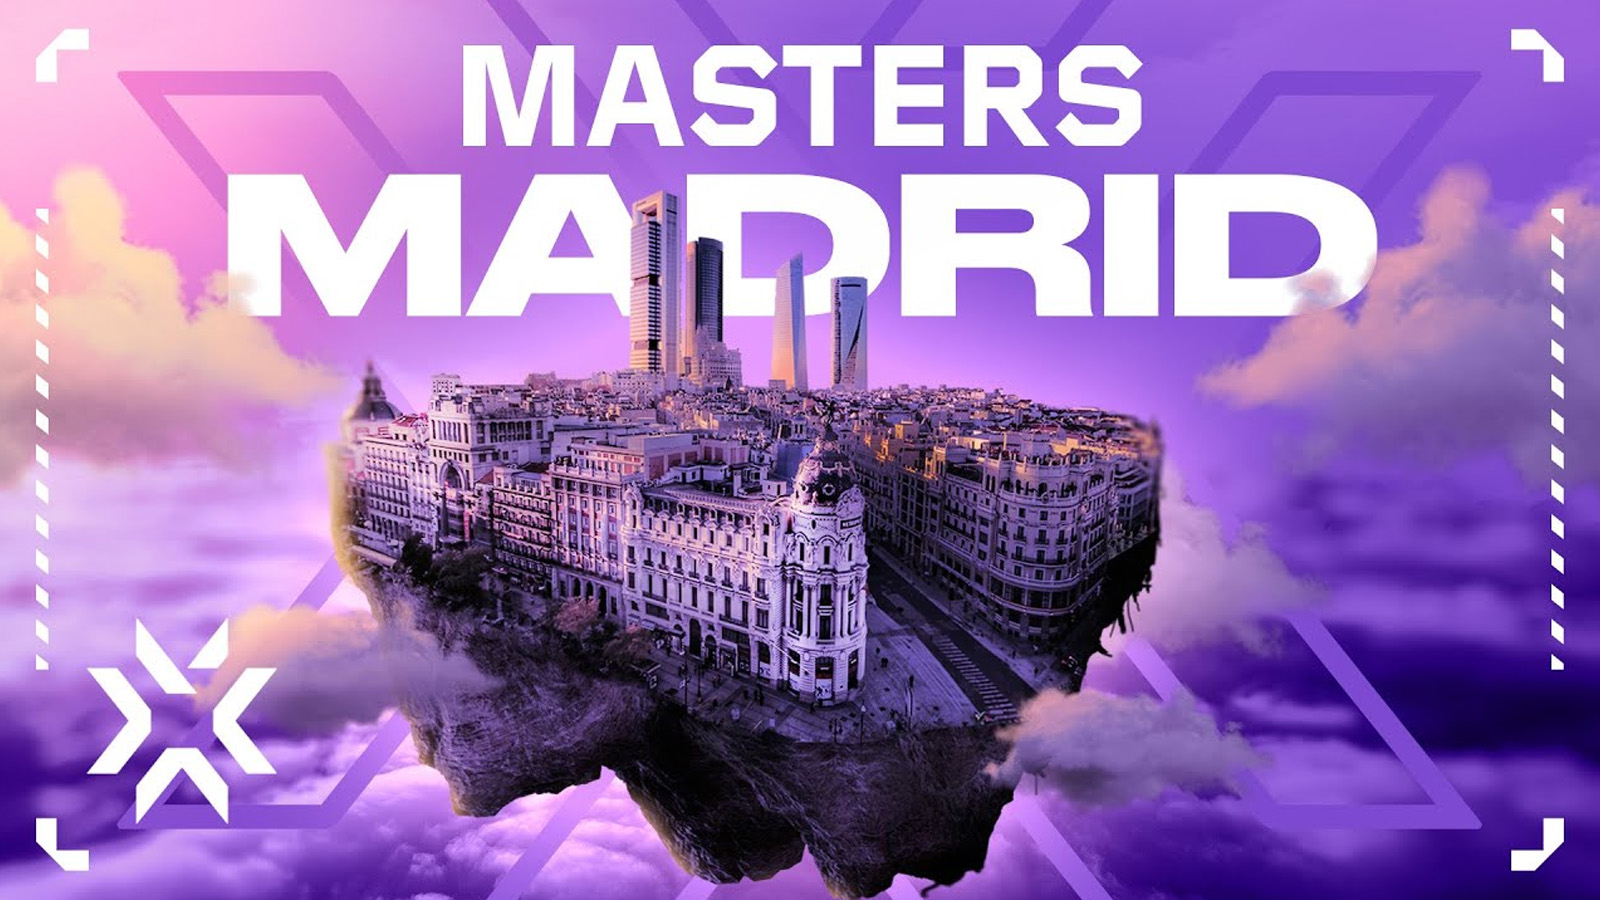 Vct madrid 2024. VCT 2024 Madrid Trophy. Madrid 2024. Мастер 2024. Artmasters 2024.